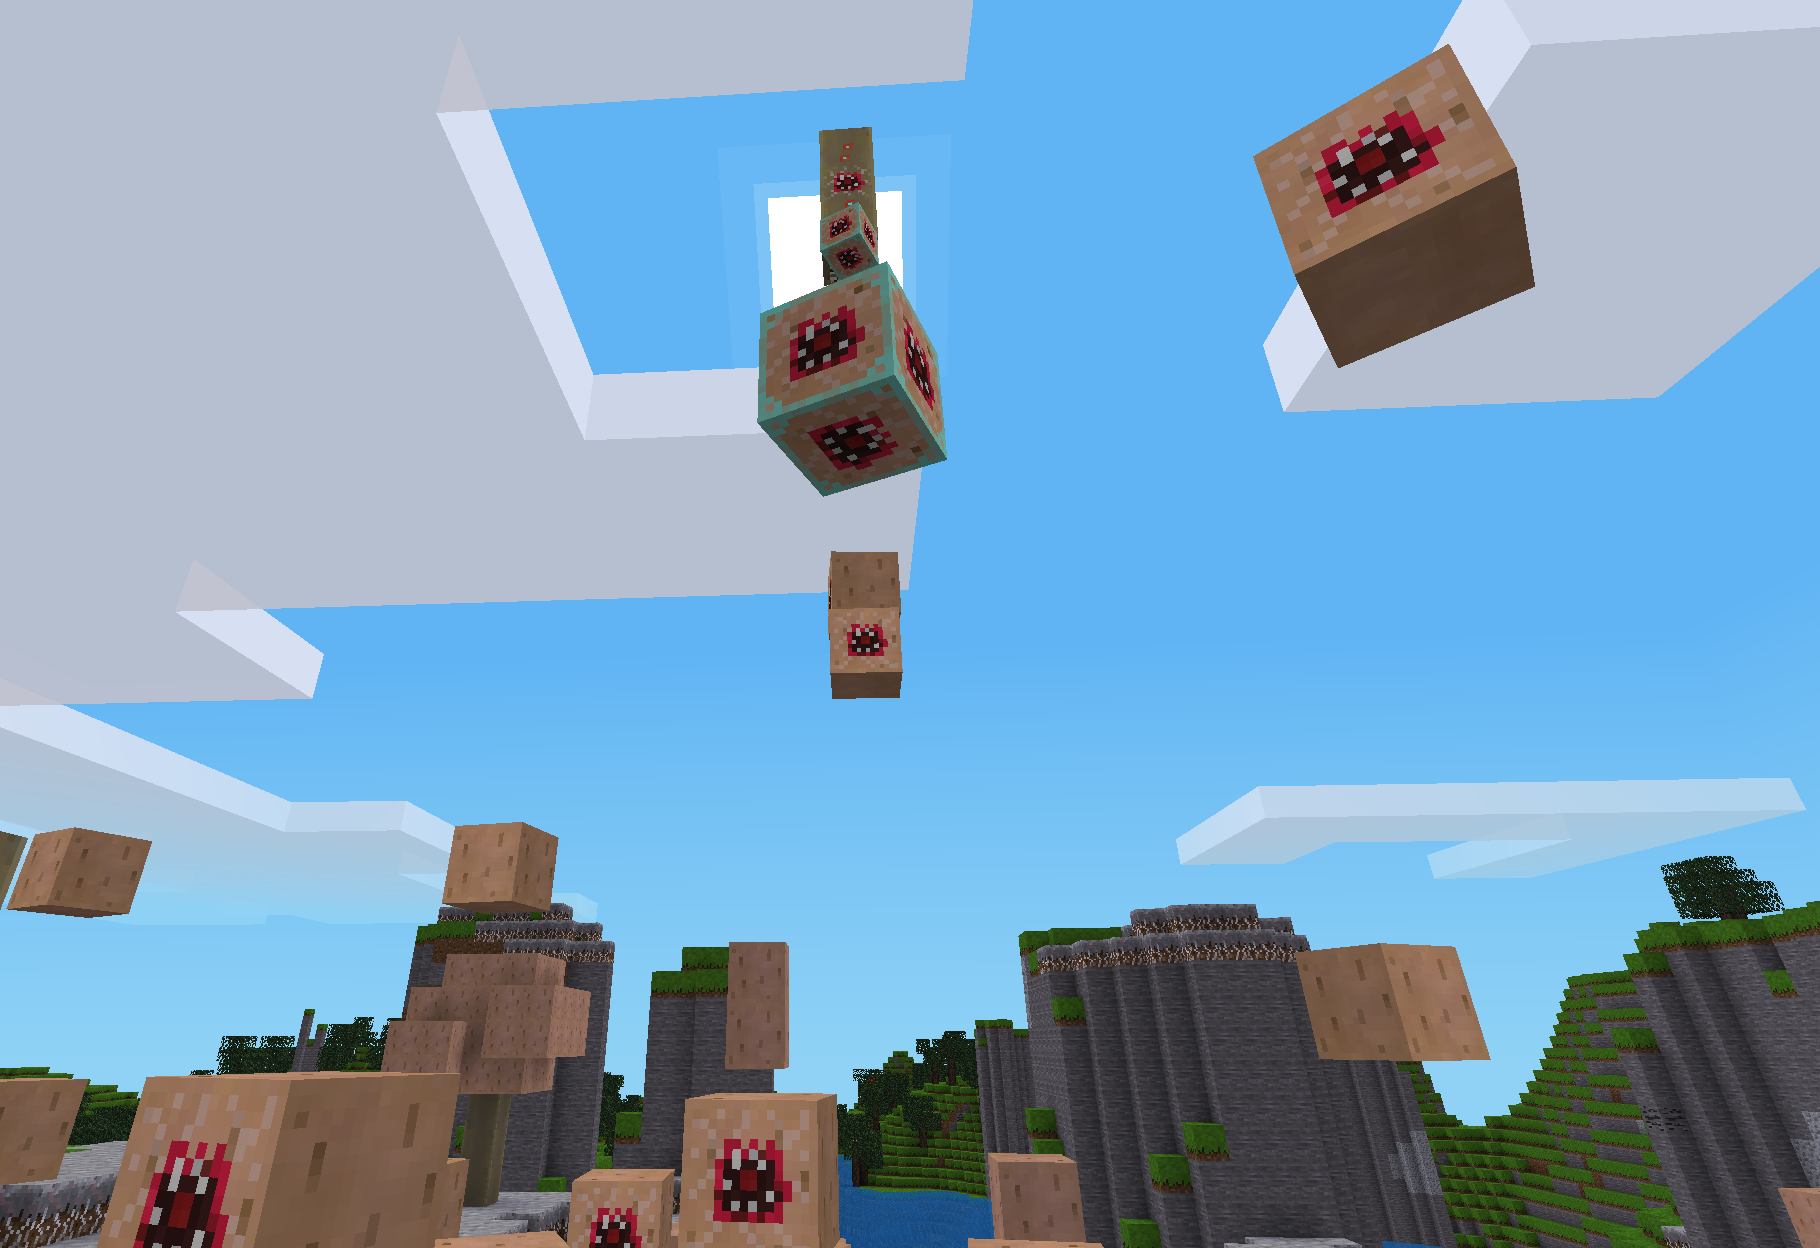 image of a giant floating mushroom stem shooting projectilesat the onlooker, surrounded by jumping mushroom blocks with teeth